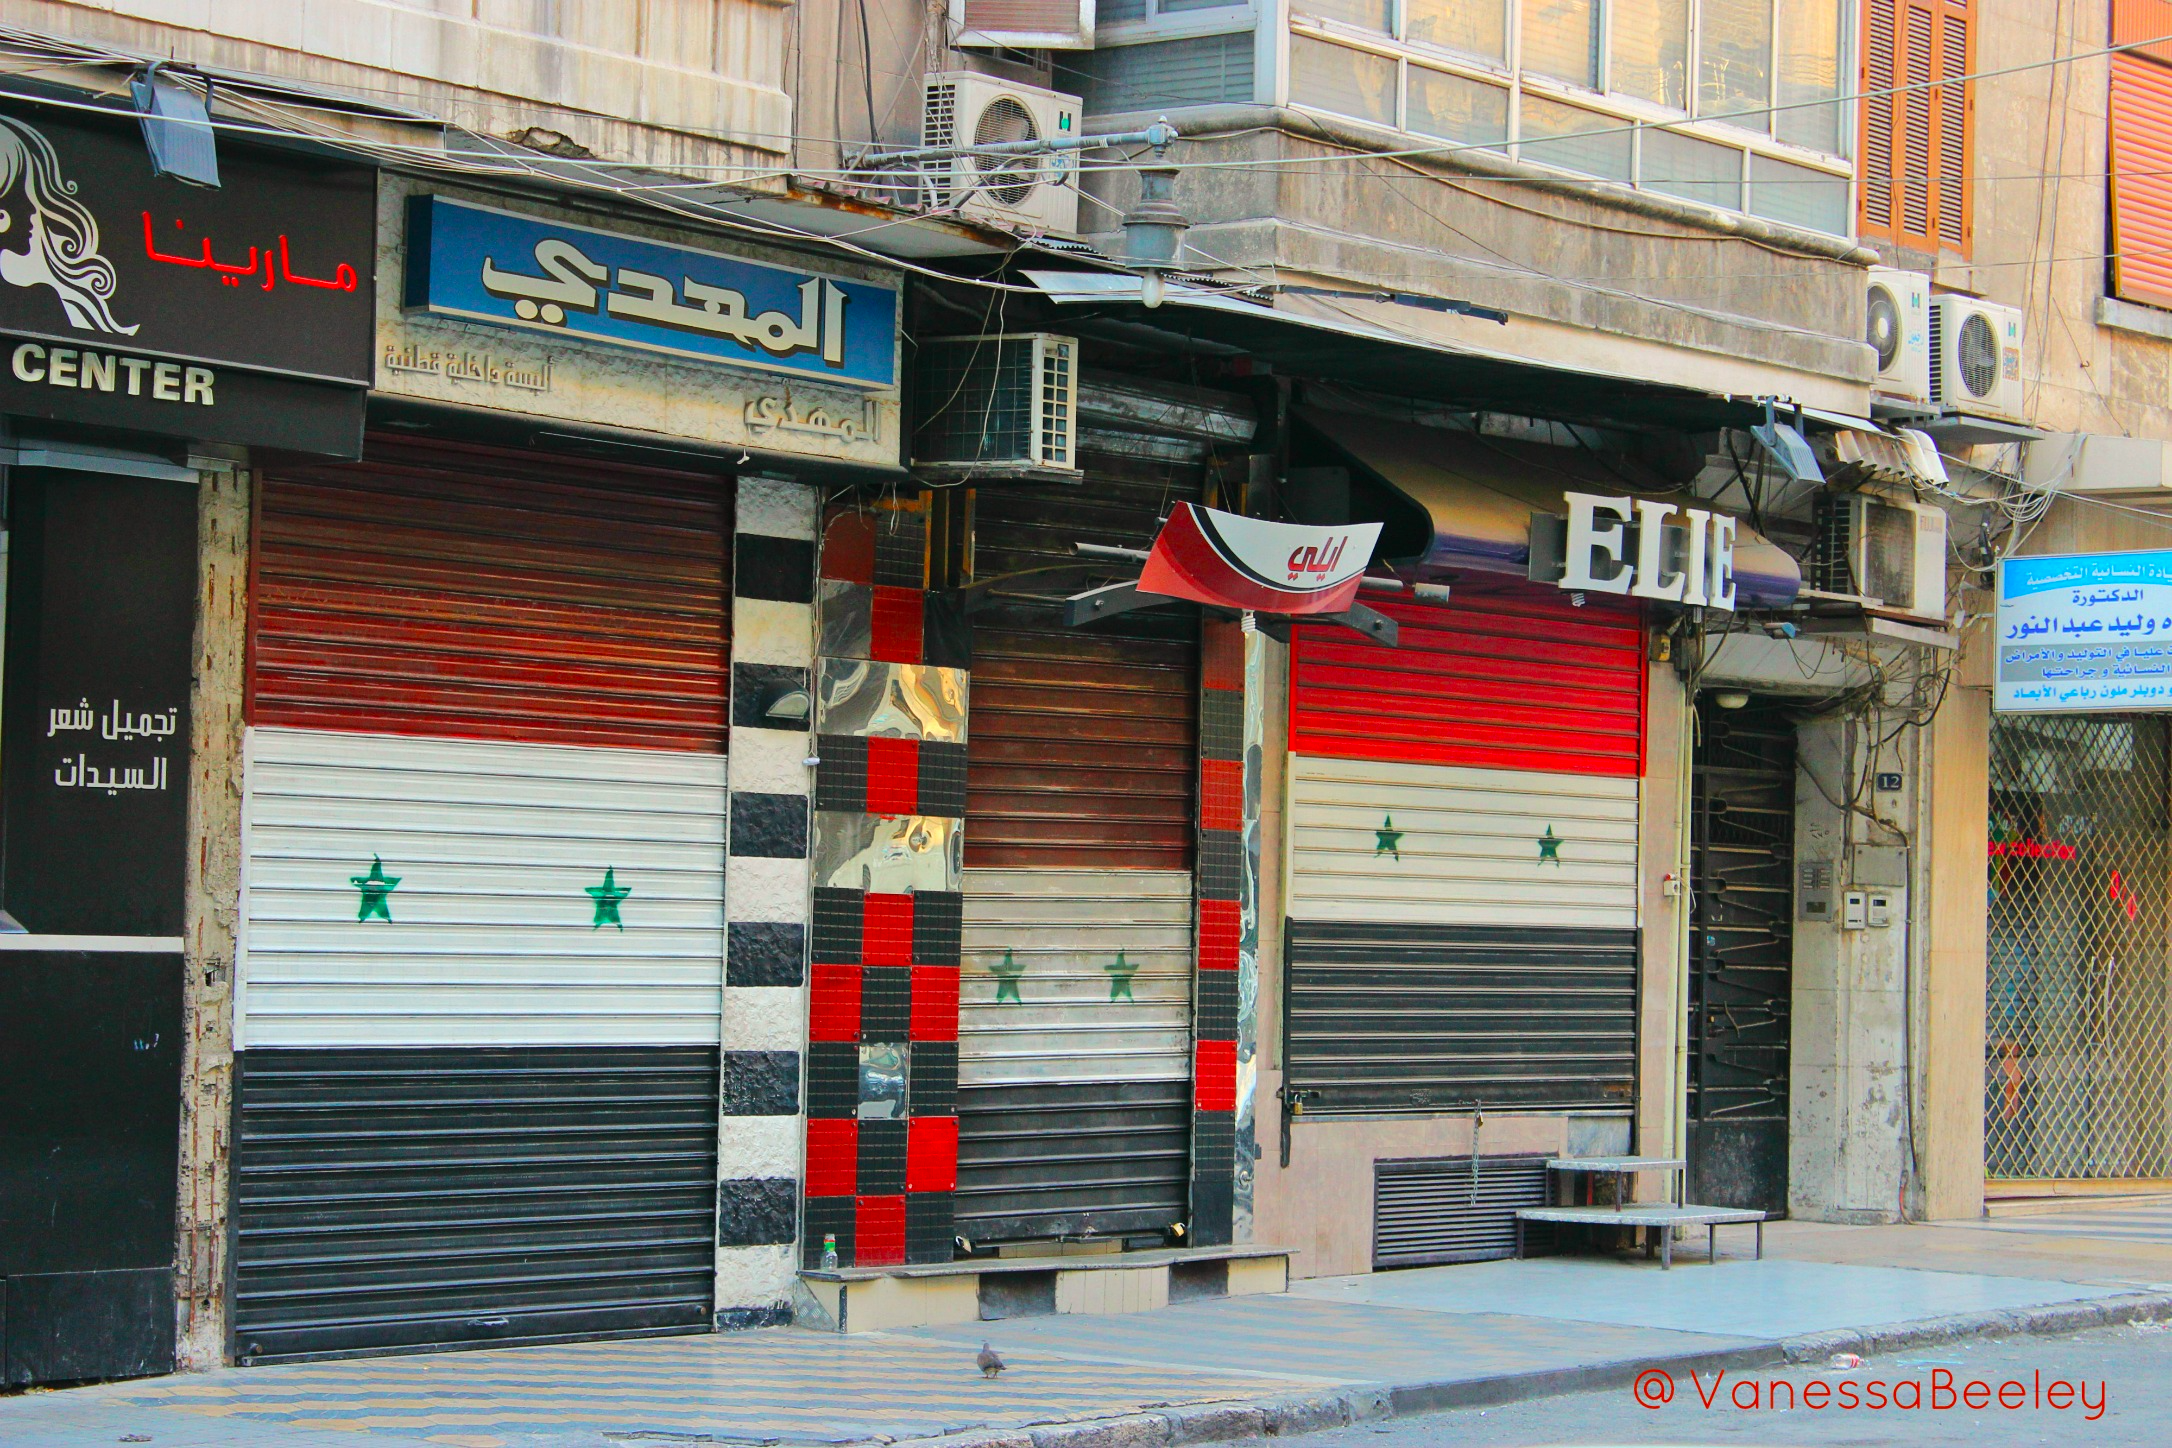 The Syrian flag painted in proud defiance onto storefront shutters in western Aleppo. (Photo: Vanessa Beeley)